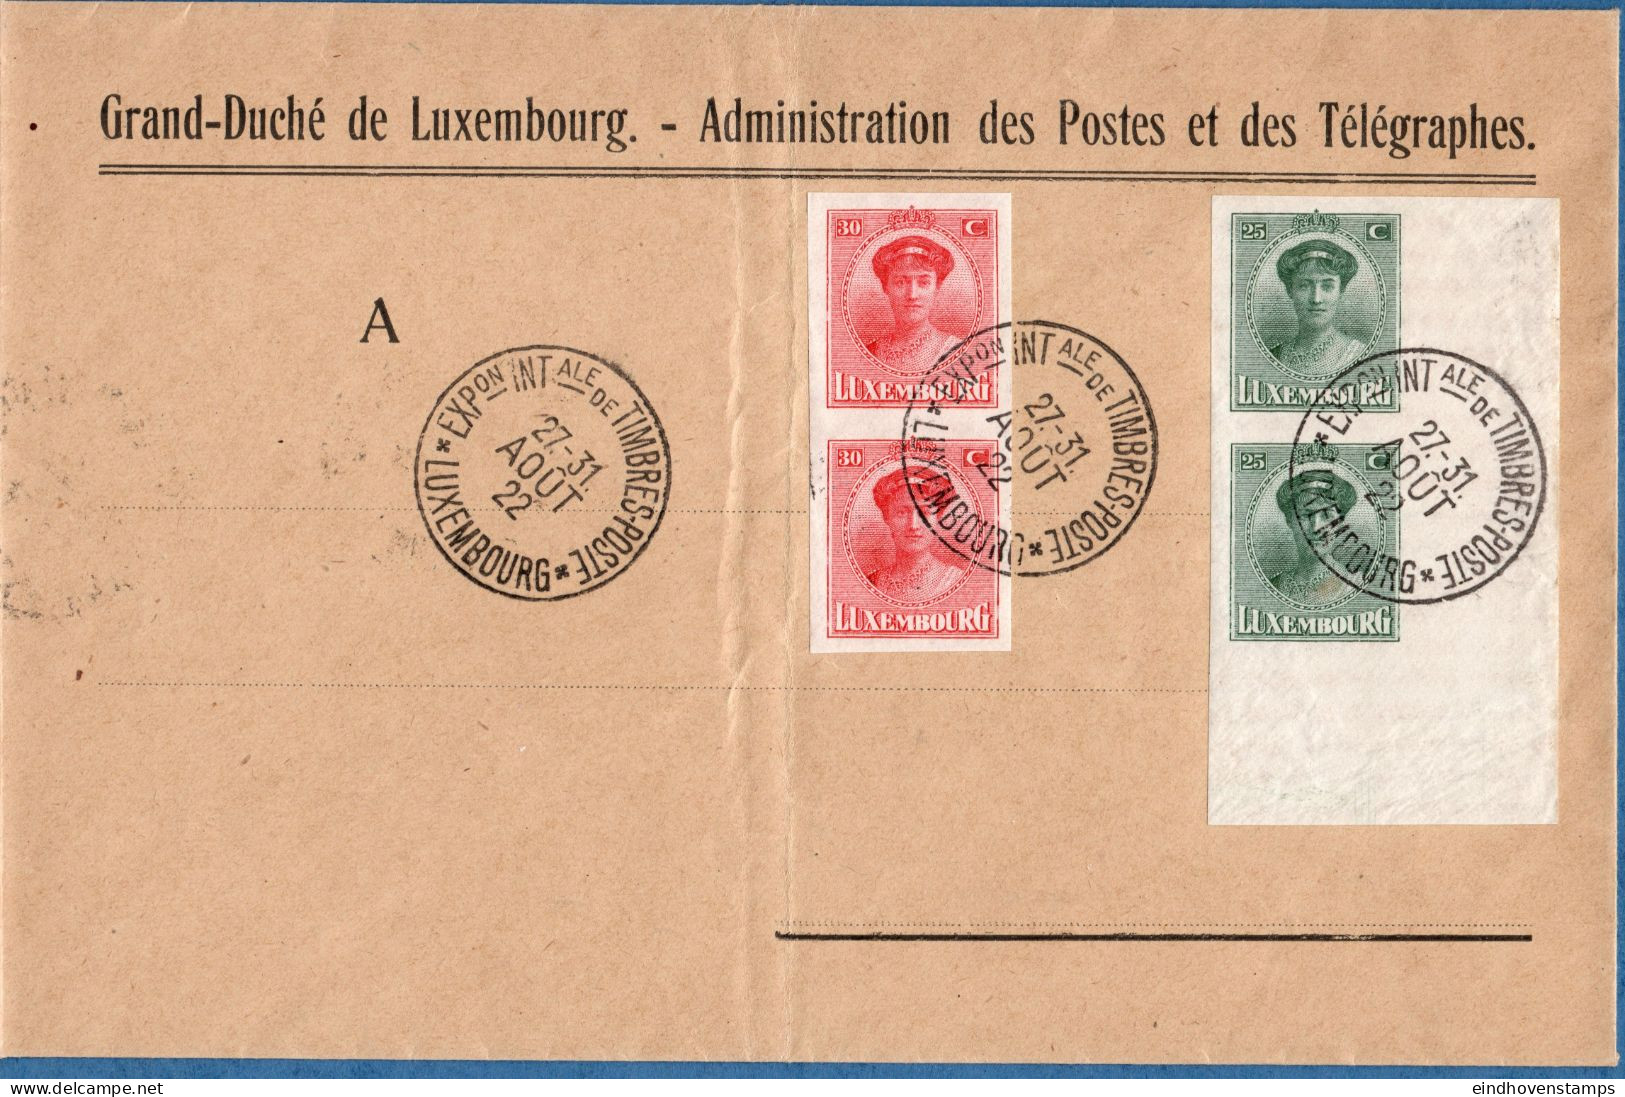 Luxemburg 1922 Exhibition Staps 2  Imperforated Pairs Cancelled On Official Cover - 25 C Sheet Cornerpair - Expositions Philatéliques